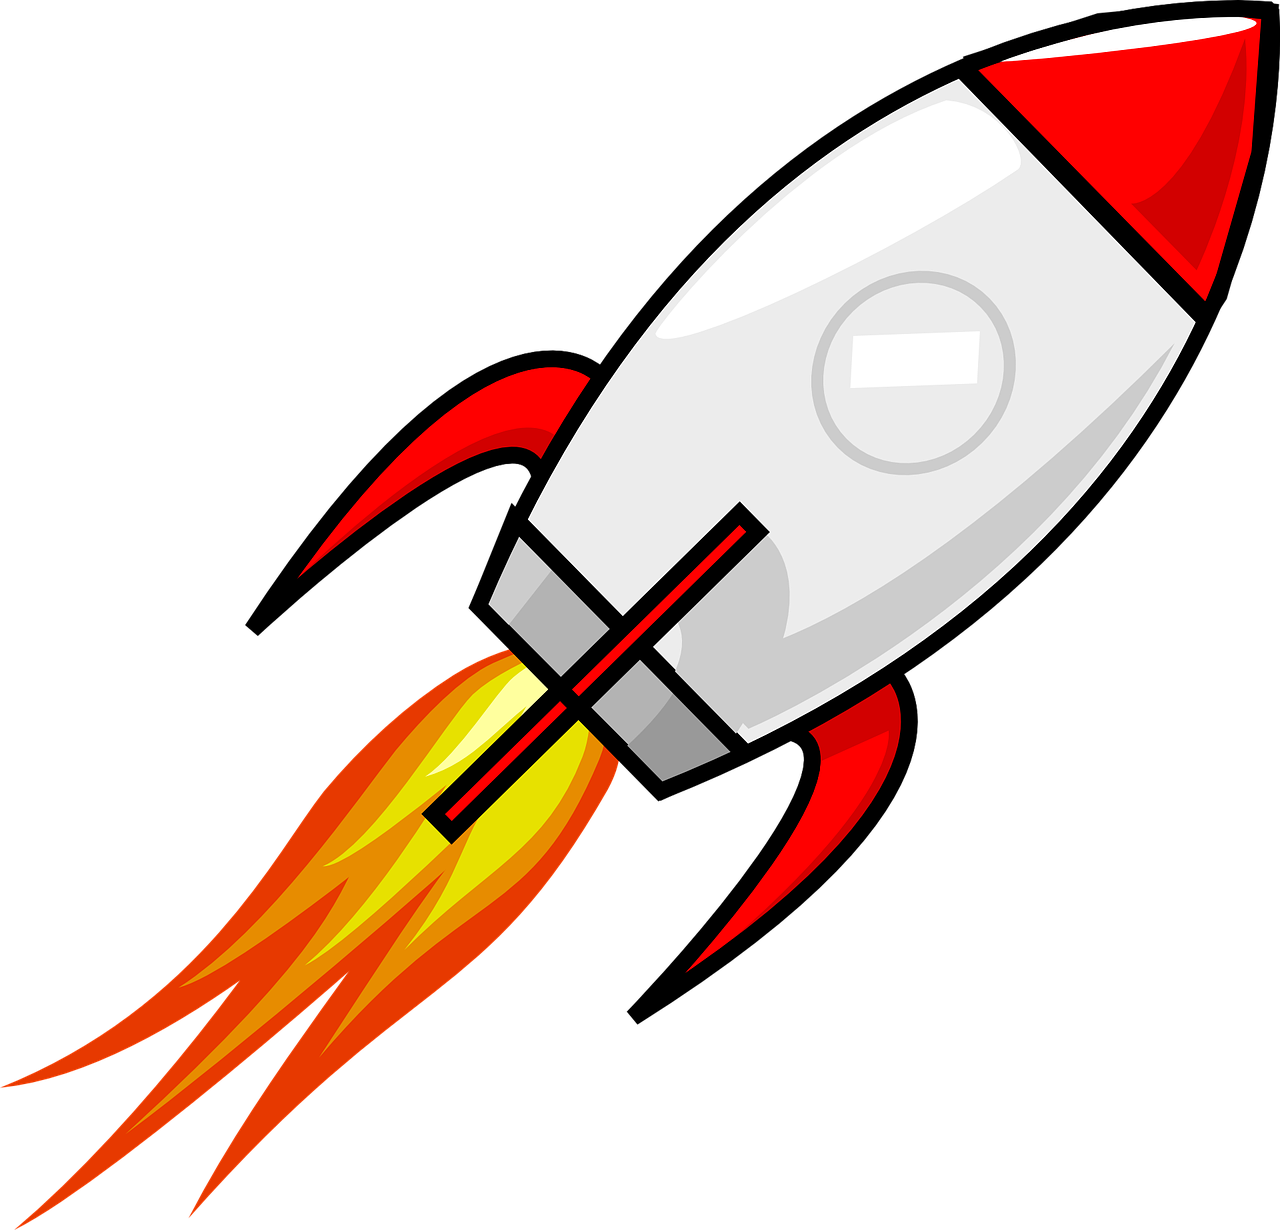 5 Simple Steps To Shoot Up Your Website - Rocket Cartoon (1280x1230)